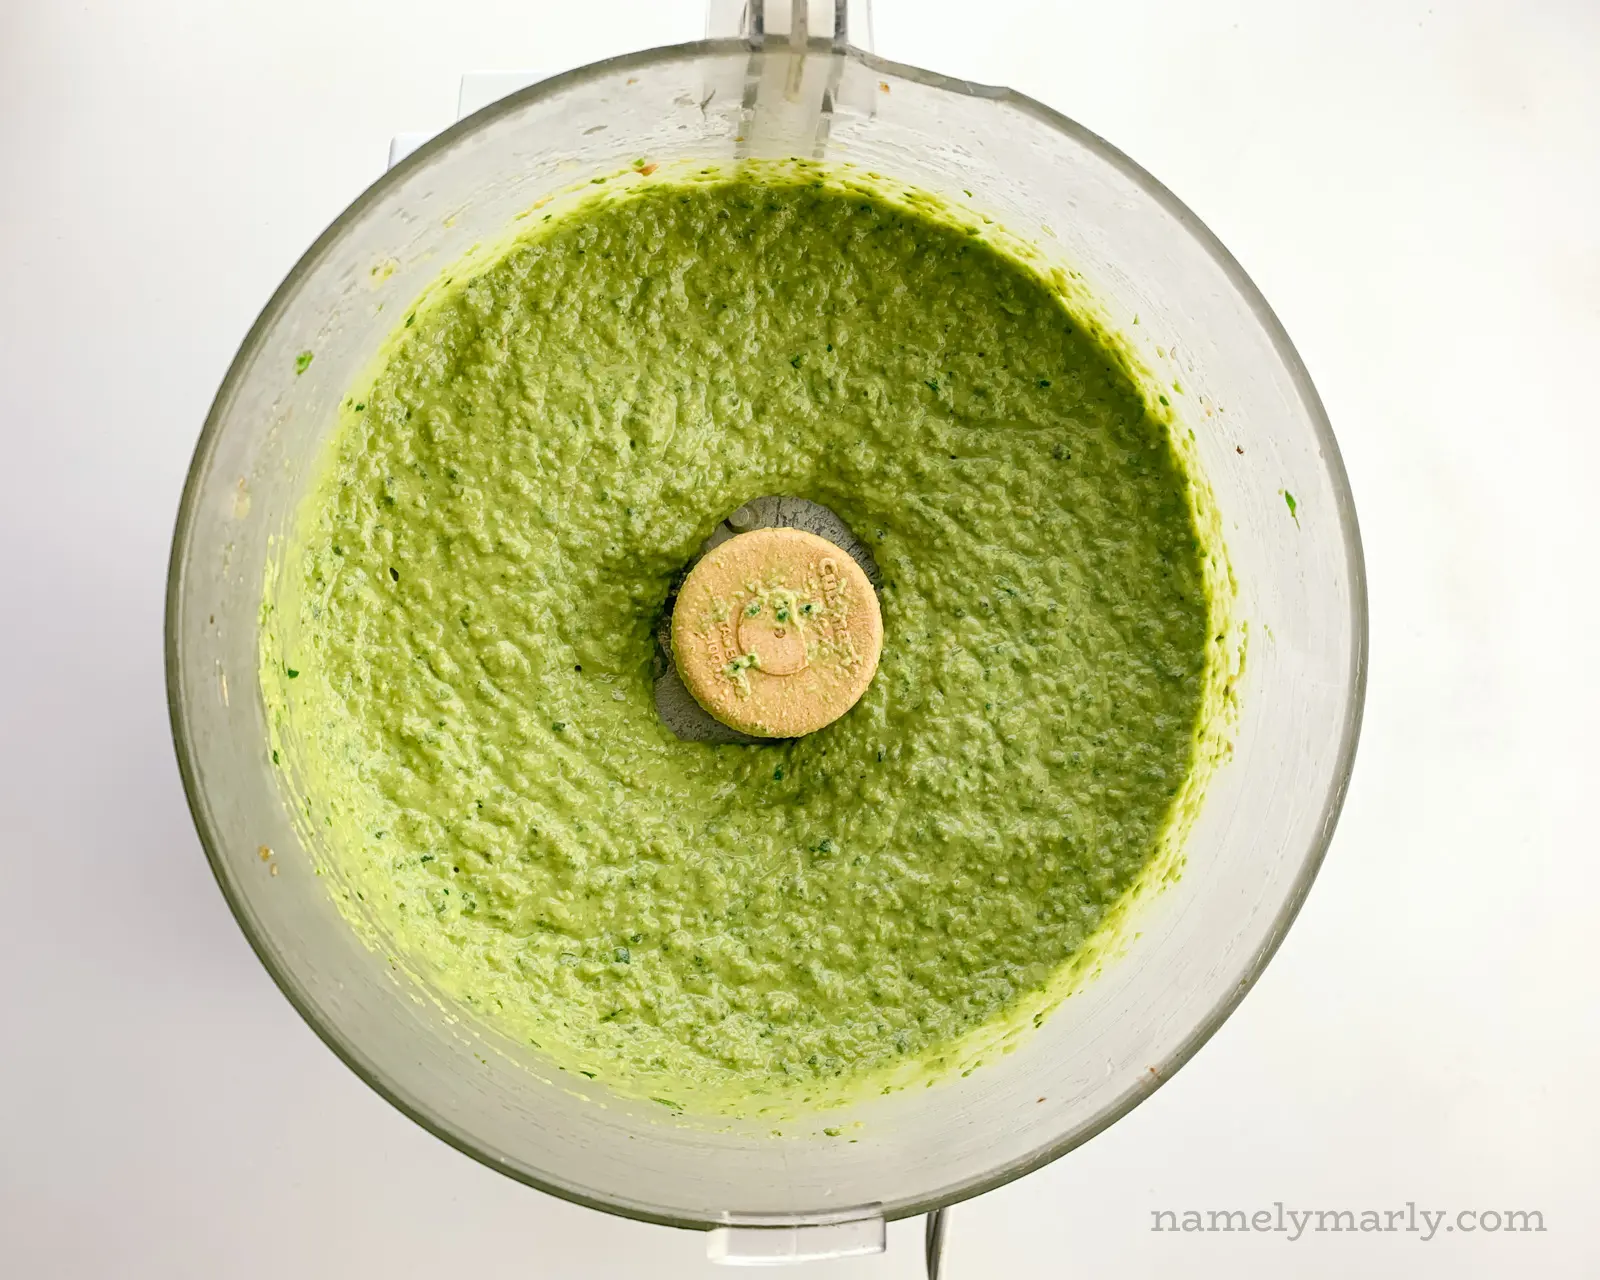 Green hummus in a food processor after being pulsed.